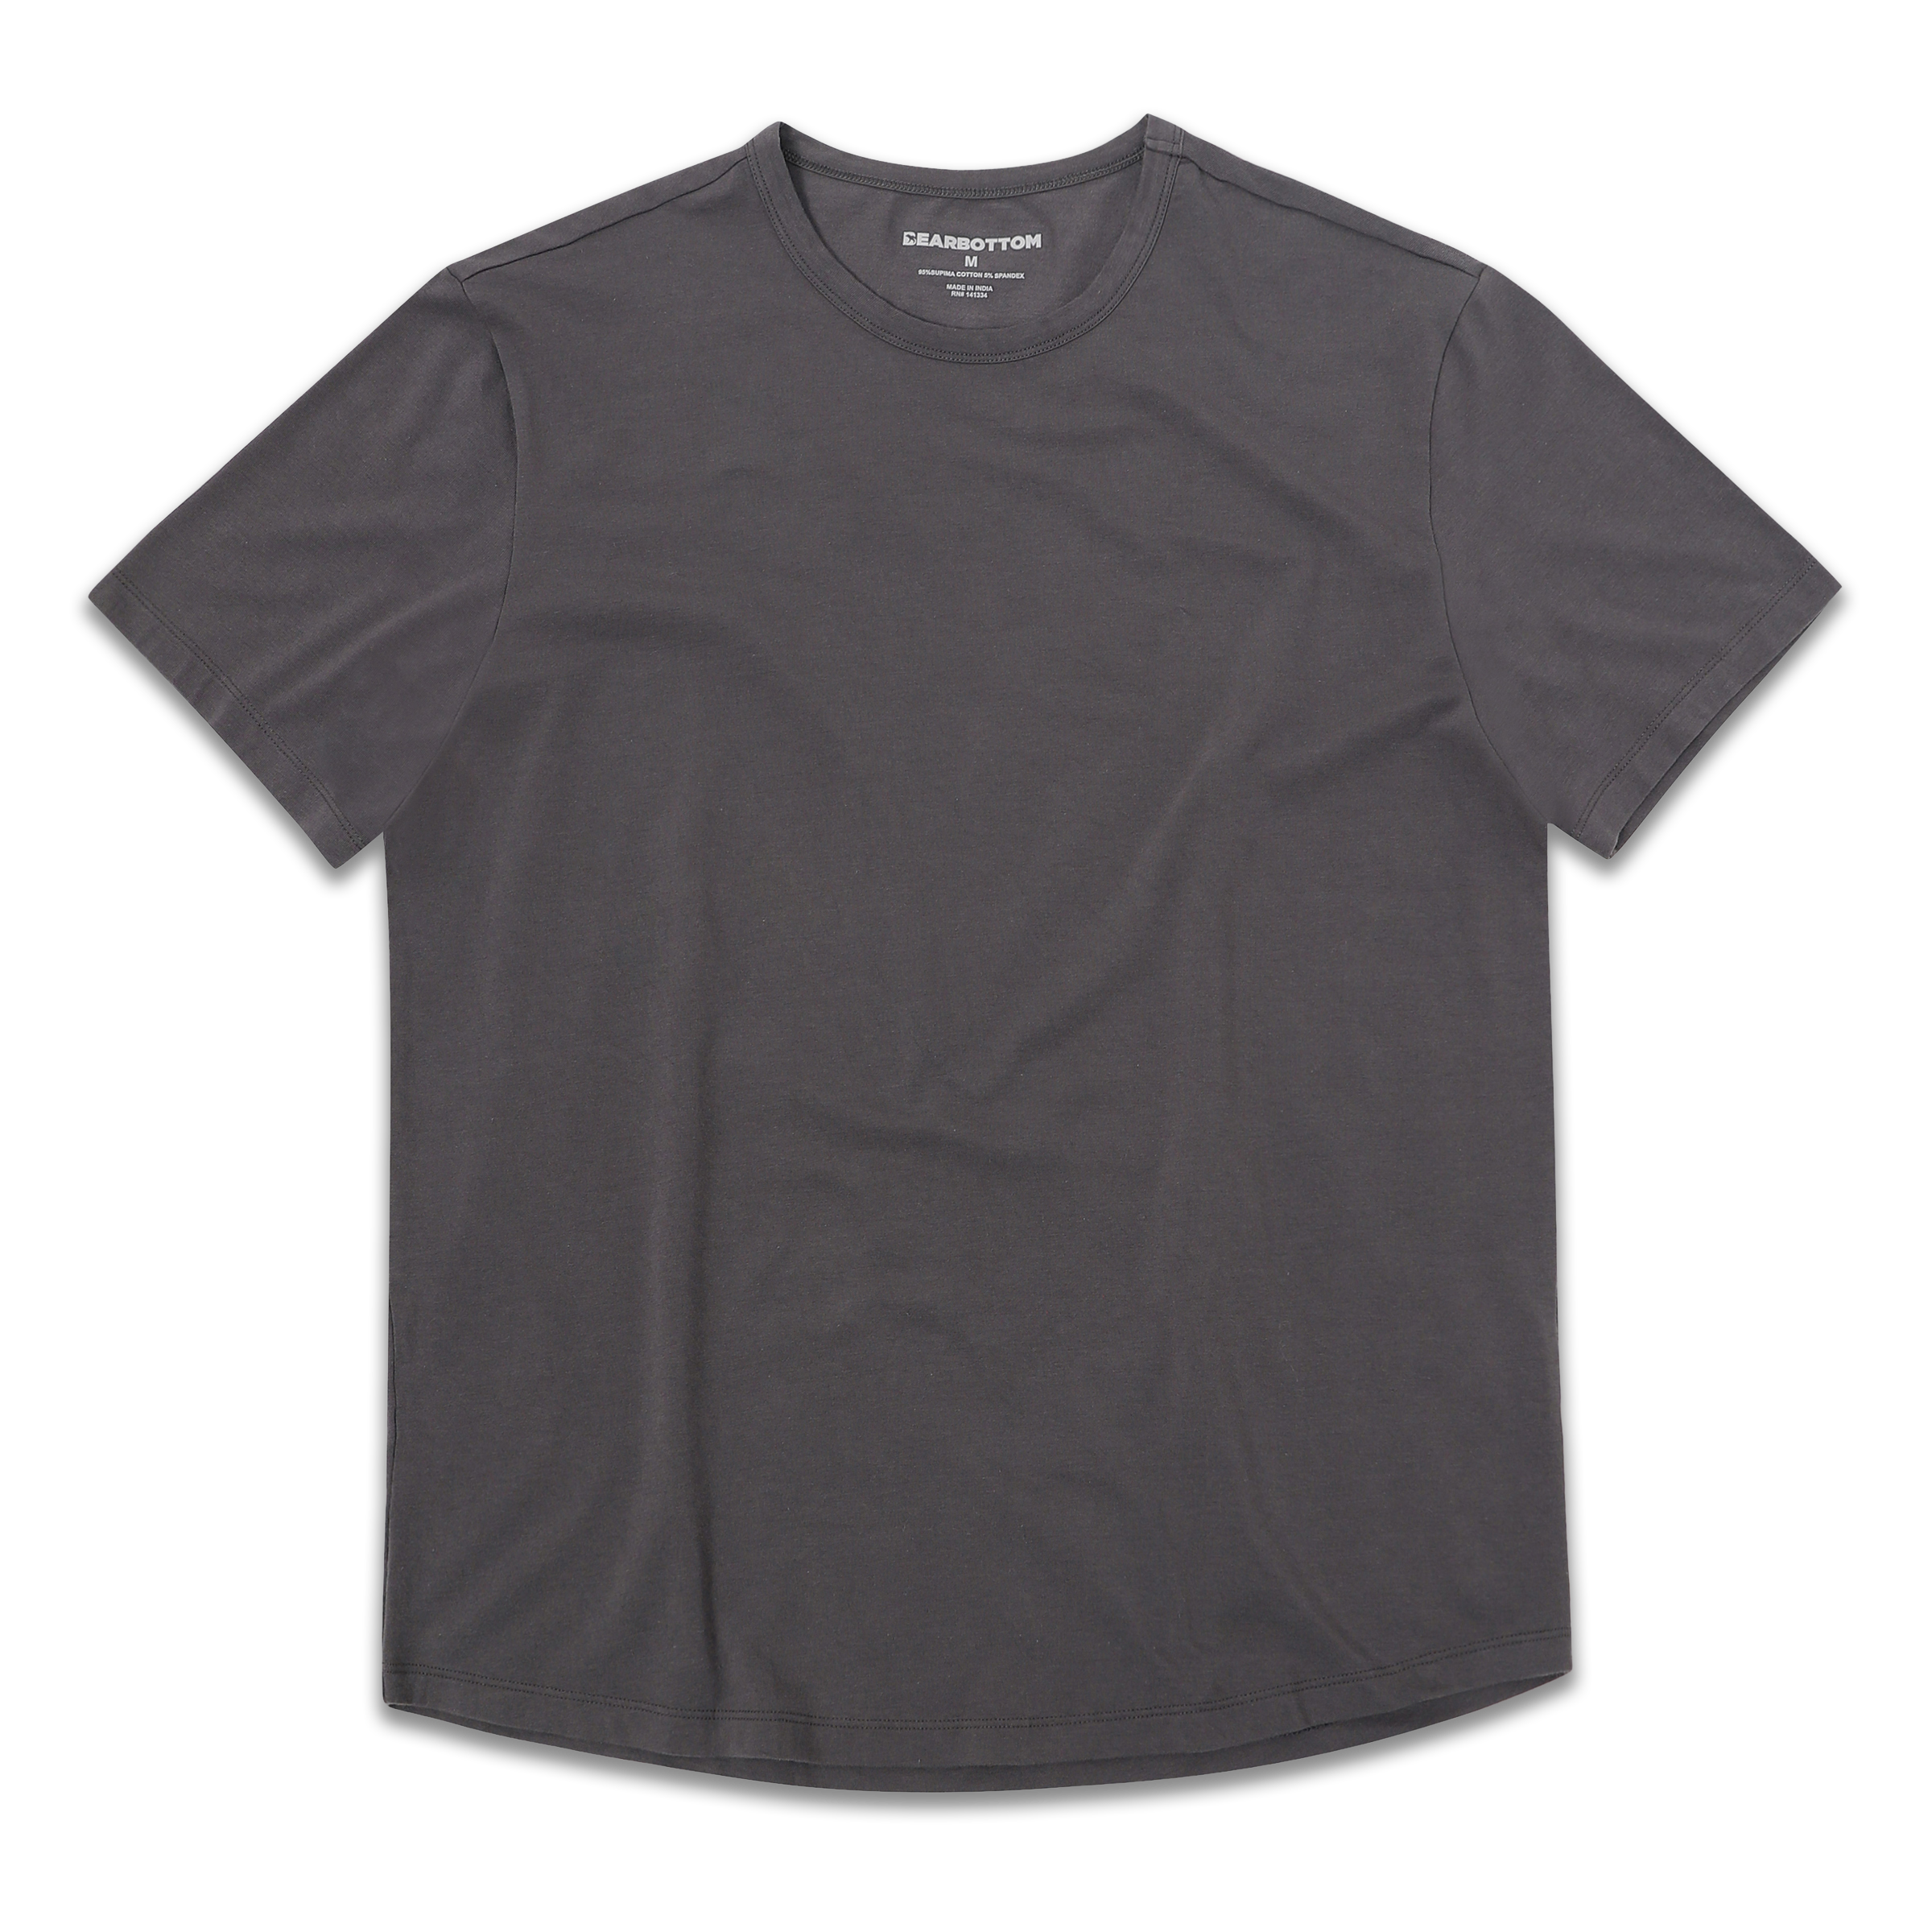 Supima Curved Tee Coal front with crewneck, curved bottom hem, and short sleeves